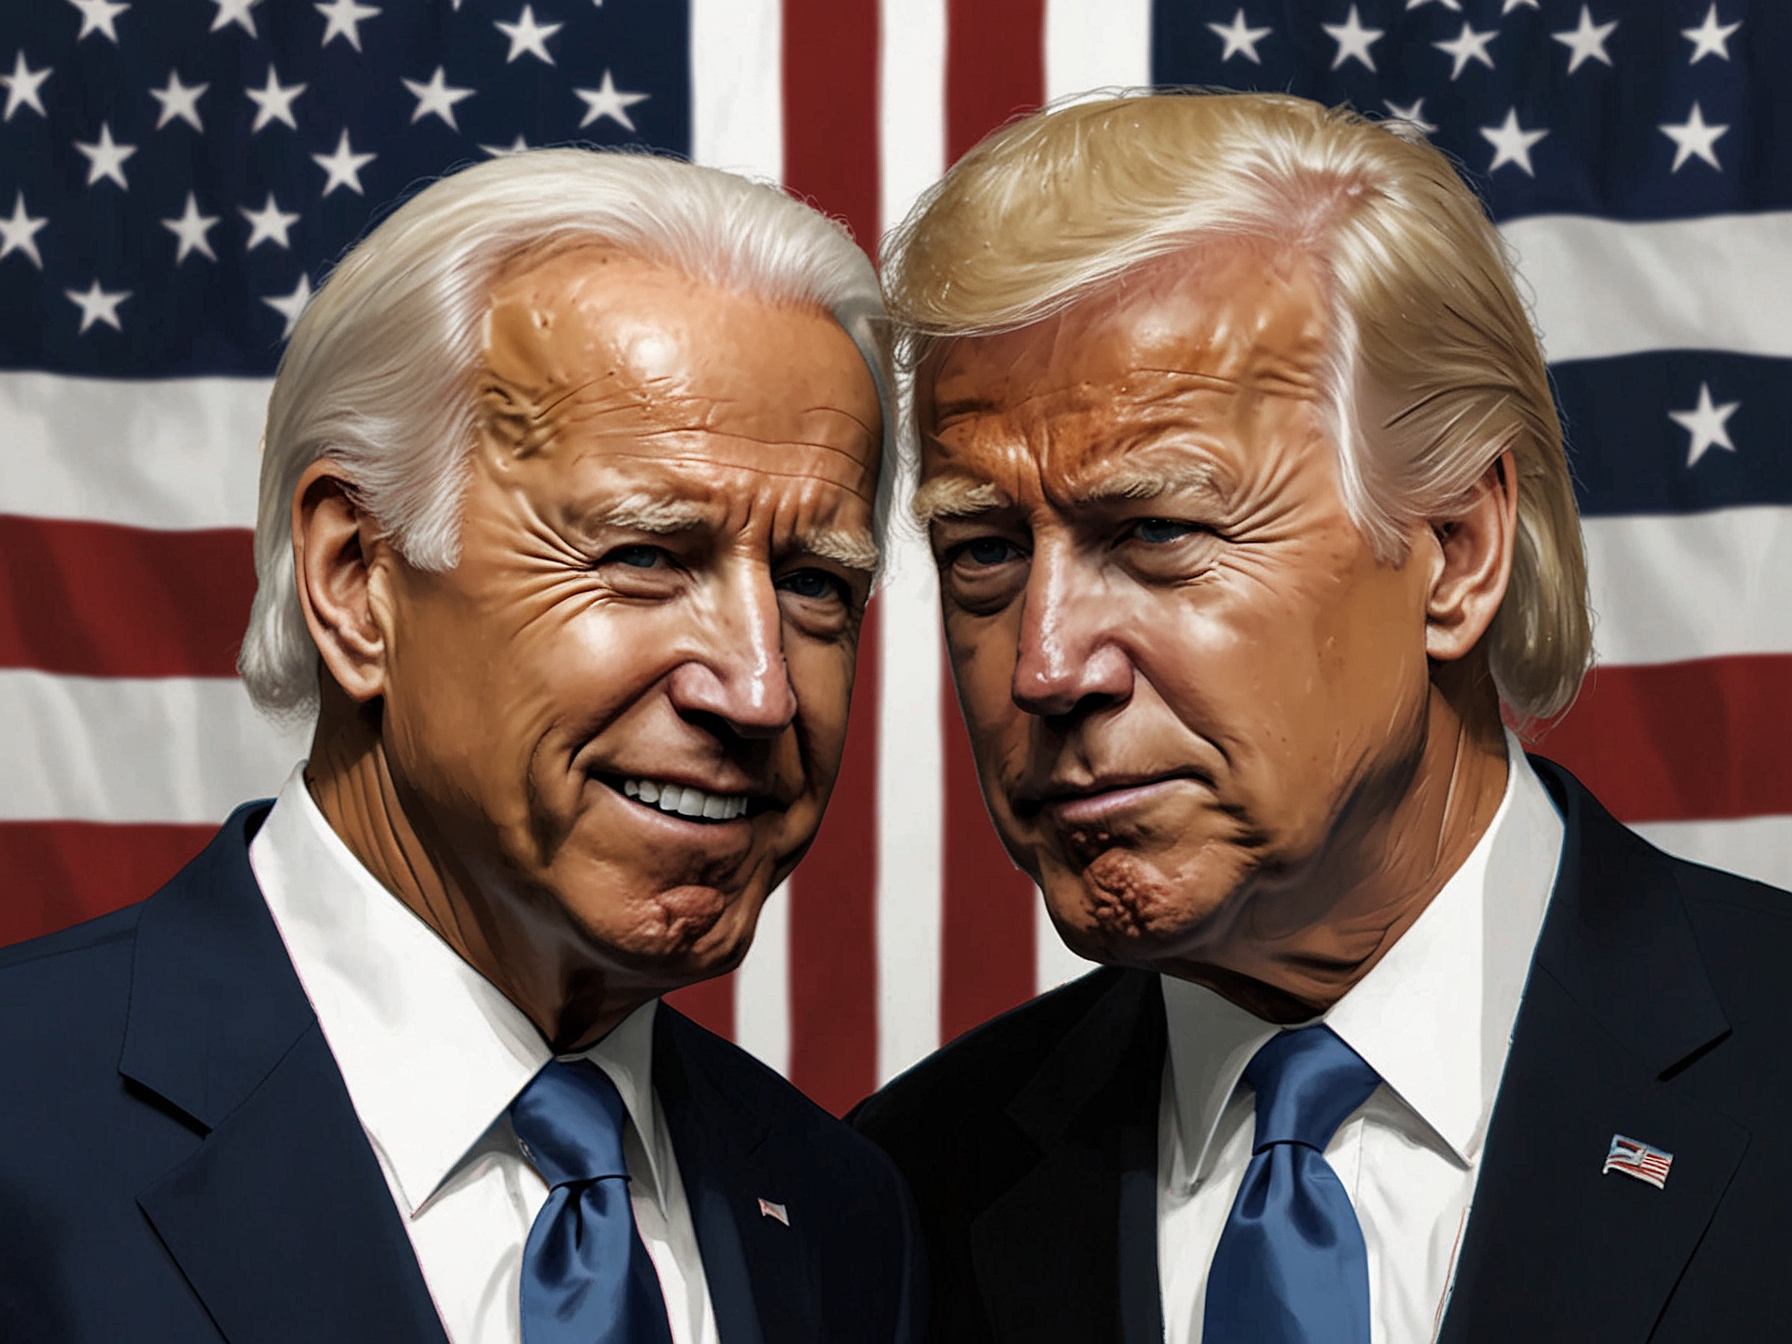 A graphical illustration of a poll results chart showing Joe Biden leading Donald Trump in a hypothetical 2024 matchup. This visualization conveys the central issue discussed in the article.